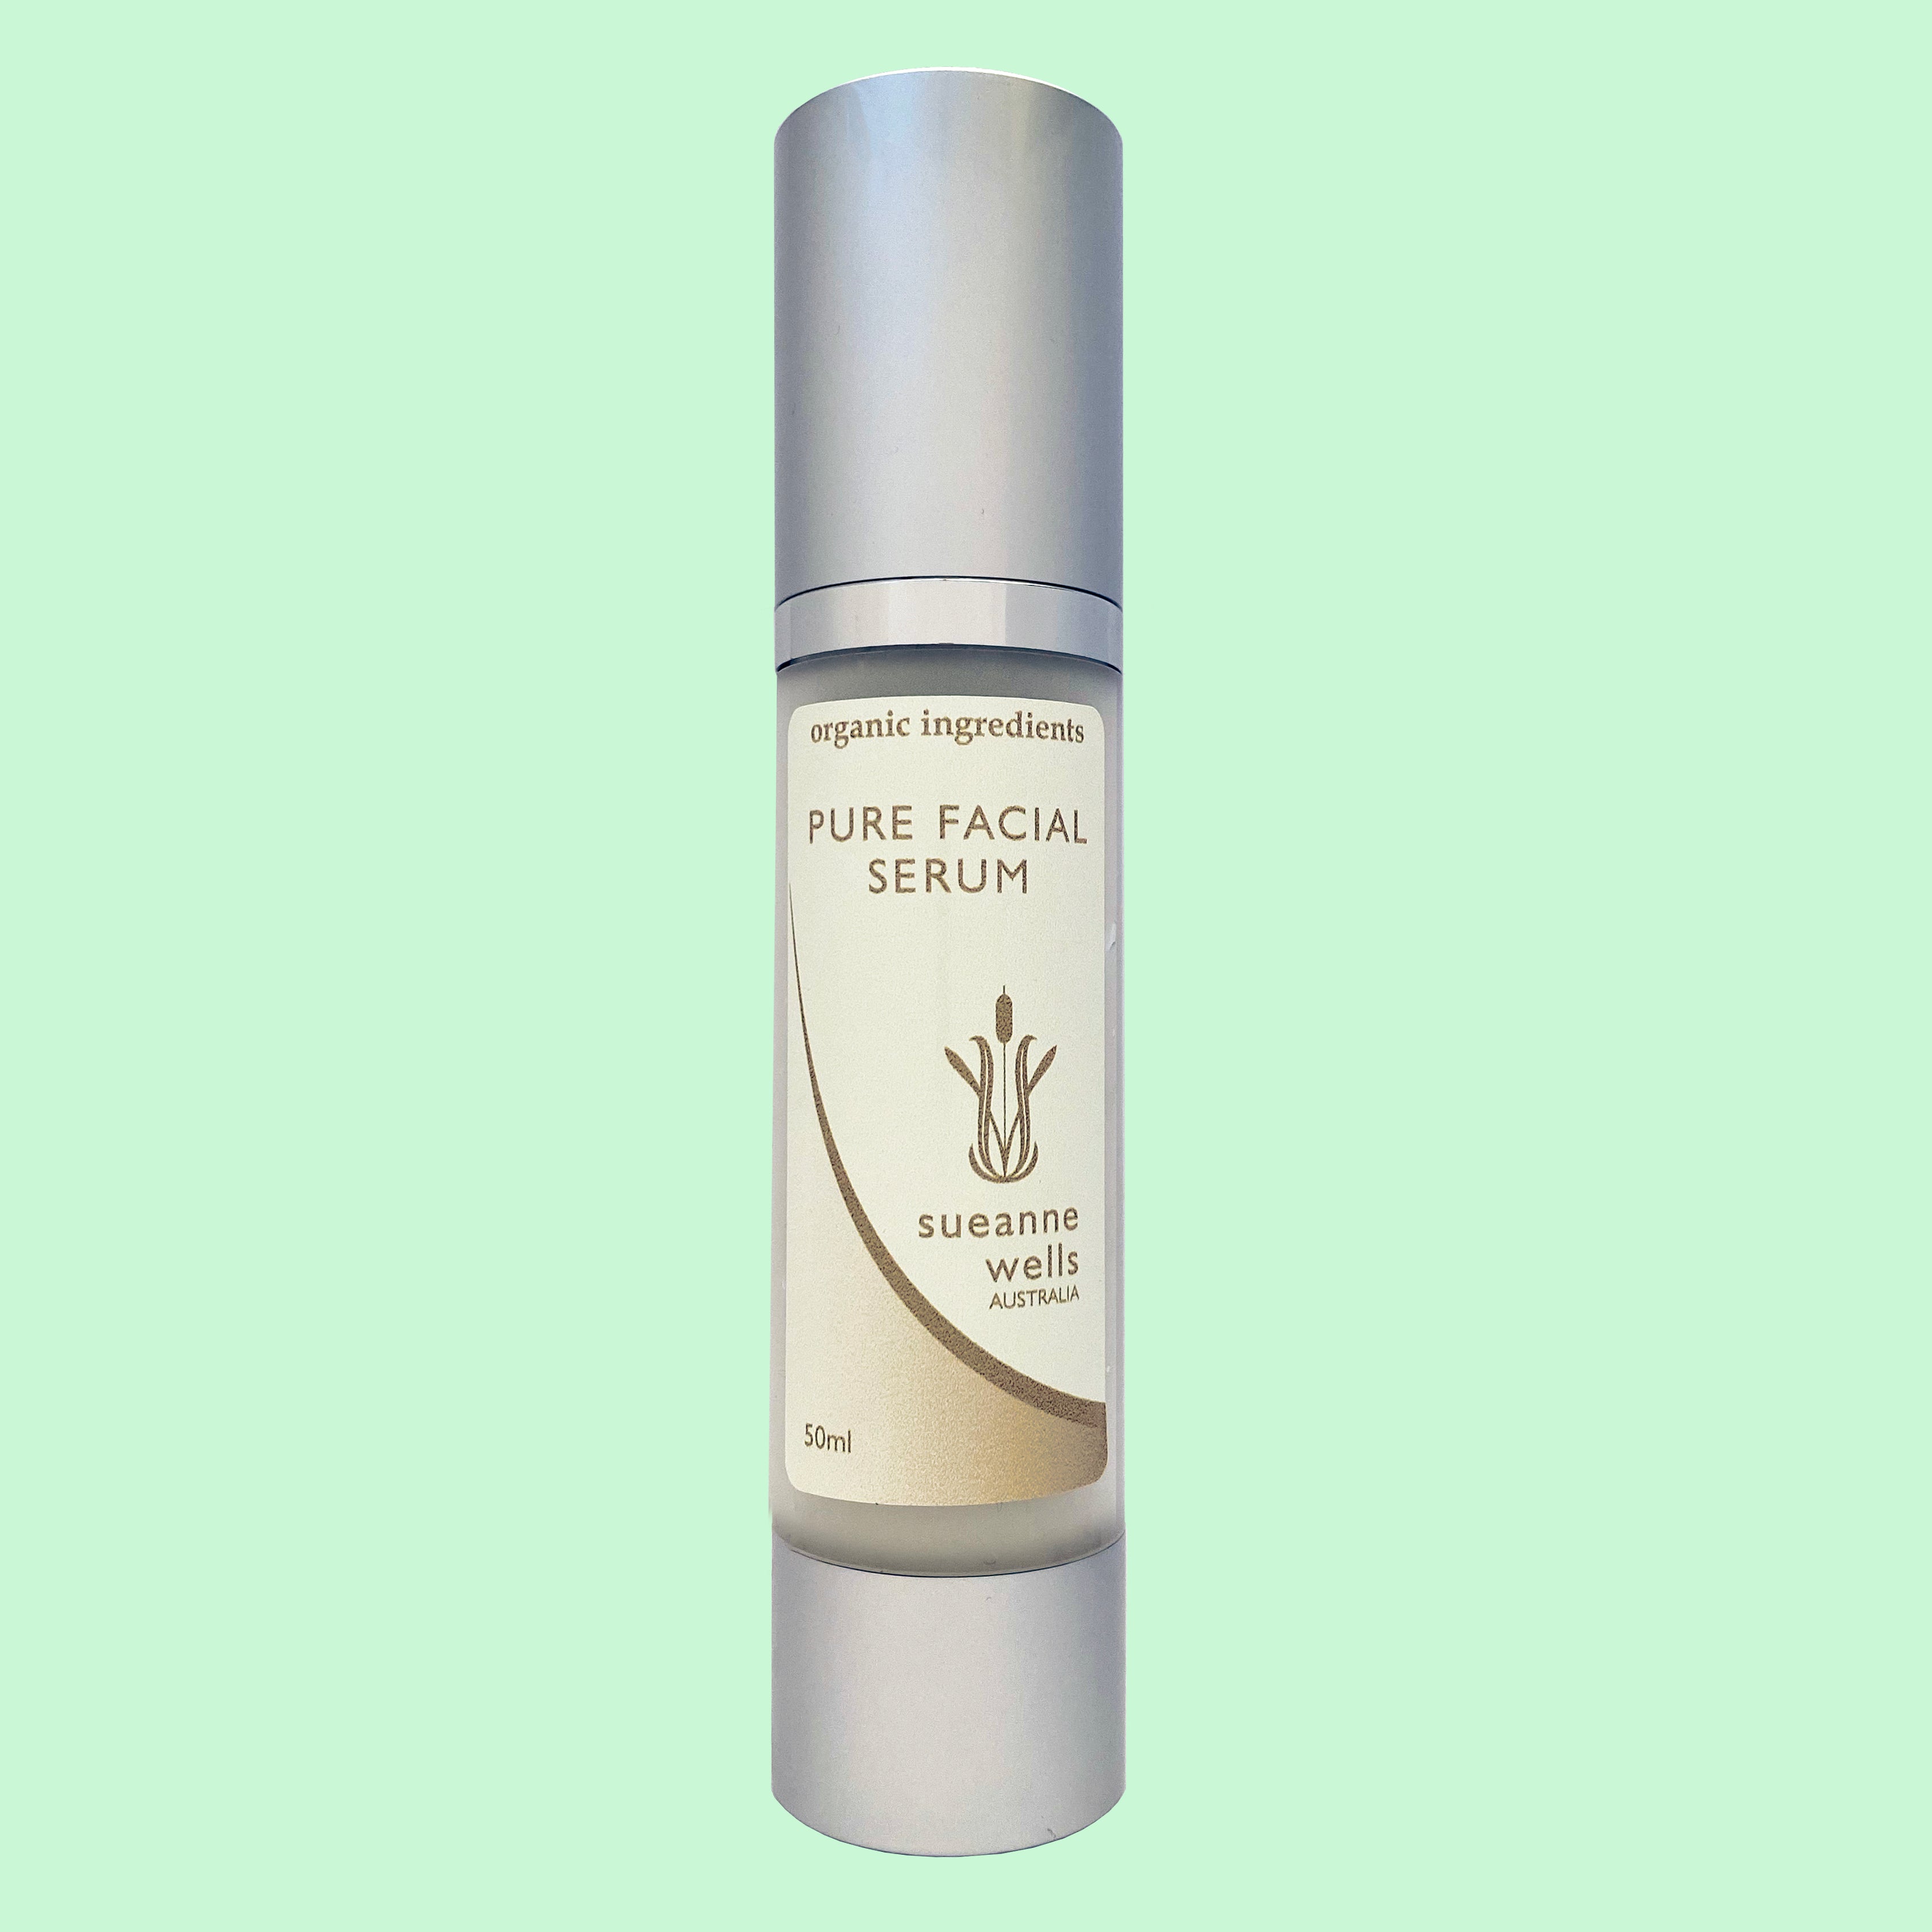 Youth extending "Facial Serum", works with the skin’s own defence system to ensure that the skin is more resistant to future signs of aging. Improves the appearance of fine lines and uneven skin tone that lead to wrinkles. Contains Aloe Vera Gelly, Rose Croatian Water, Marine Collagen, Hyaluronic, Rice Bran Oil, Vitamin A, Rose Hip Oil, Vegetable Glycerine, Plantaserv S, Sandalwood Essential Oil. Skin Care, Chemical And Preservative Free, Plant Based, Australian Made.